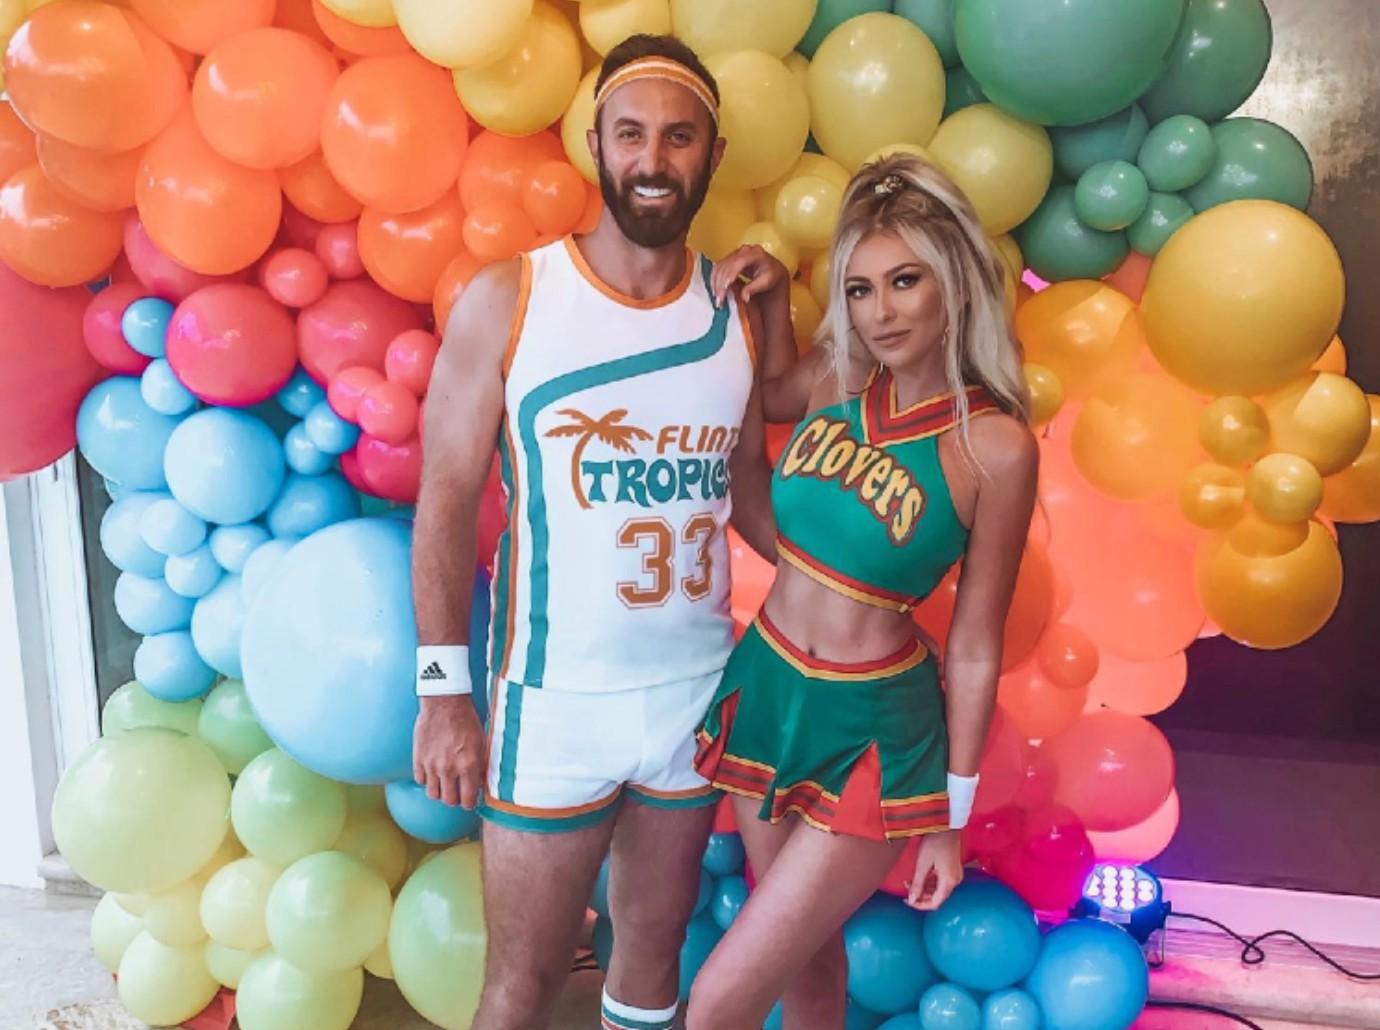 Why Paulina Gretzky 'stayed away from athletes' before Dustin Johnson